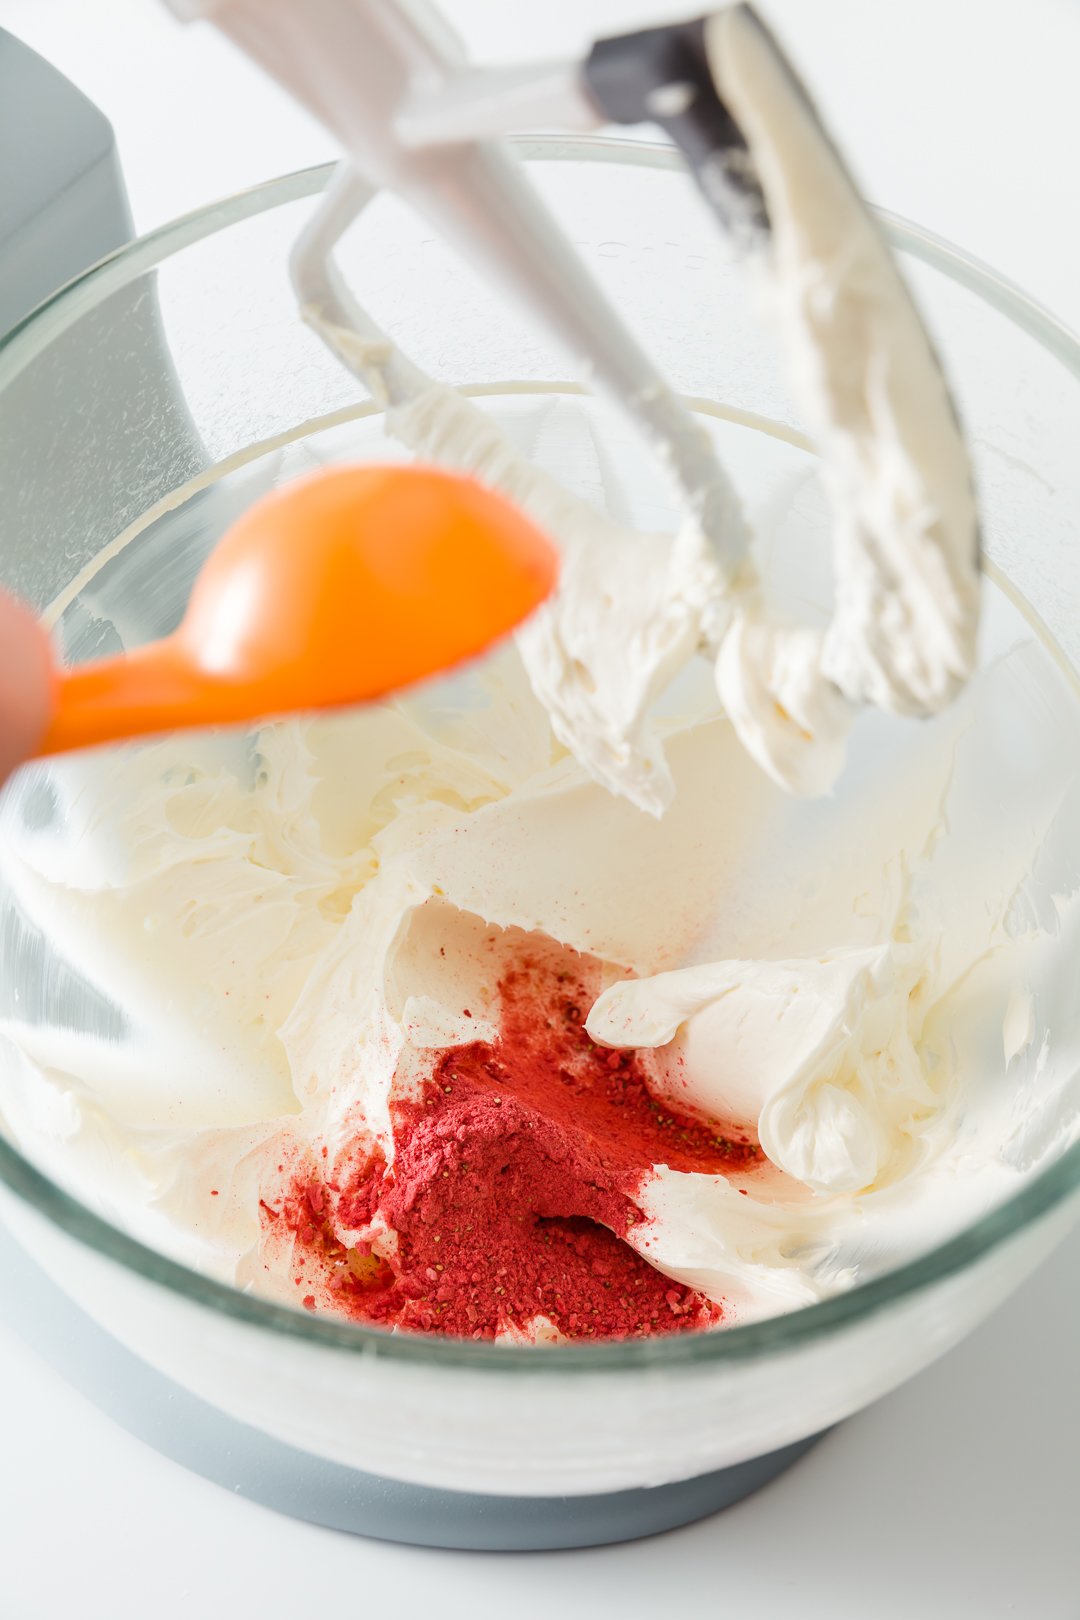 a view into an electric stand mixer bowl where strawberry powder is being added to cream cheese whipped with butter